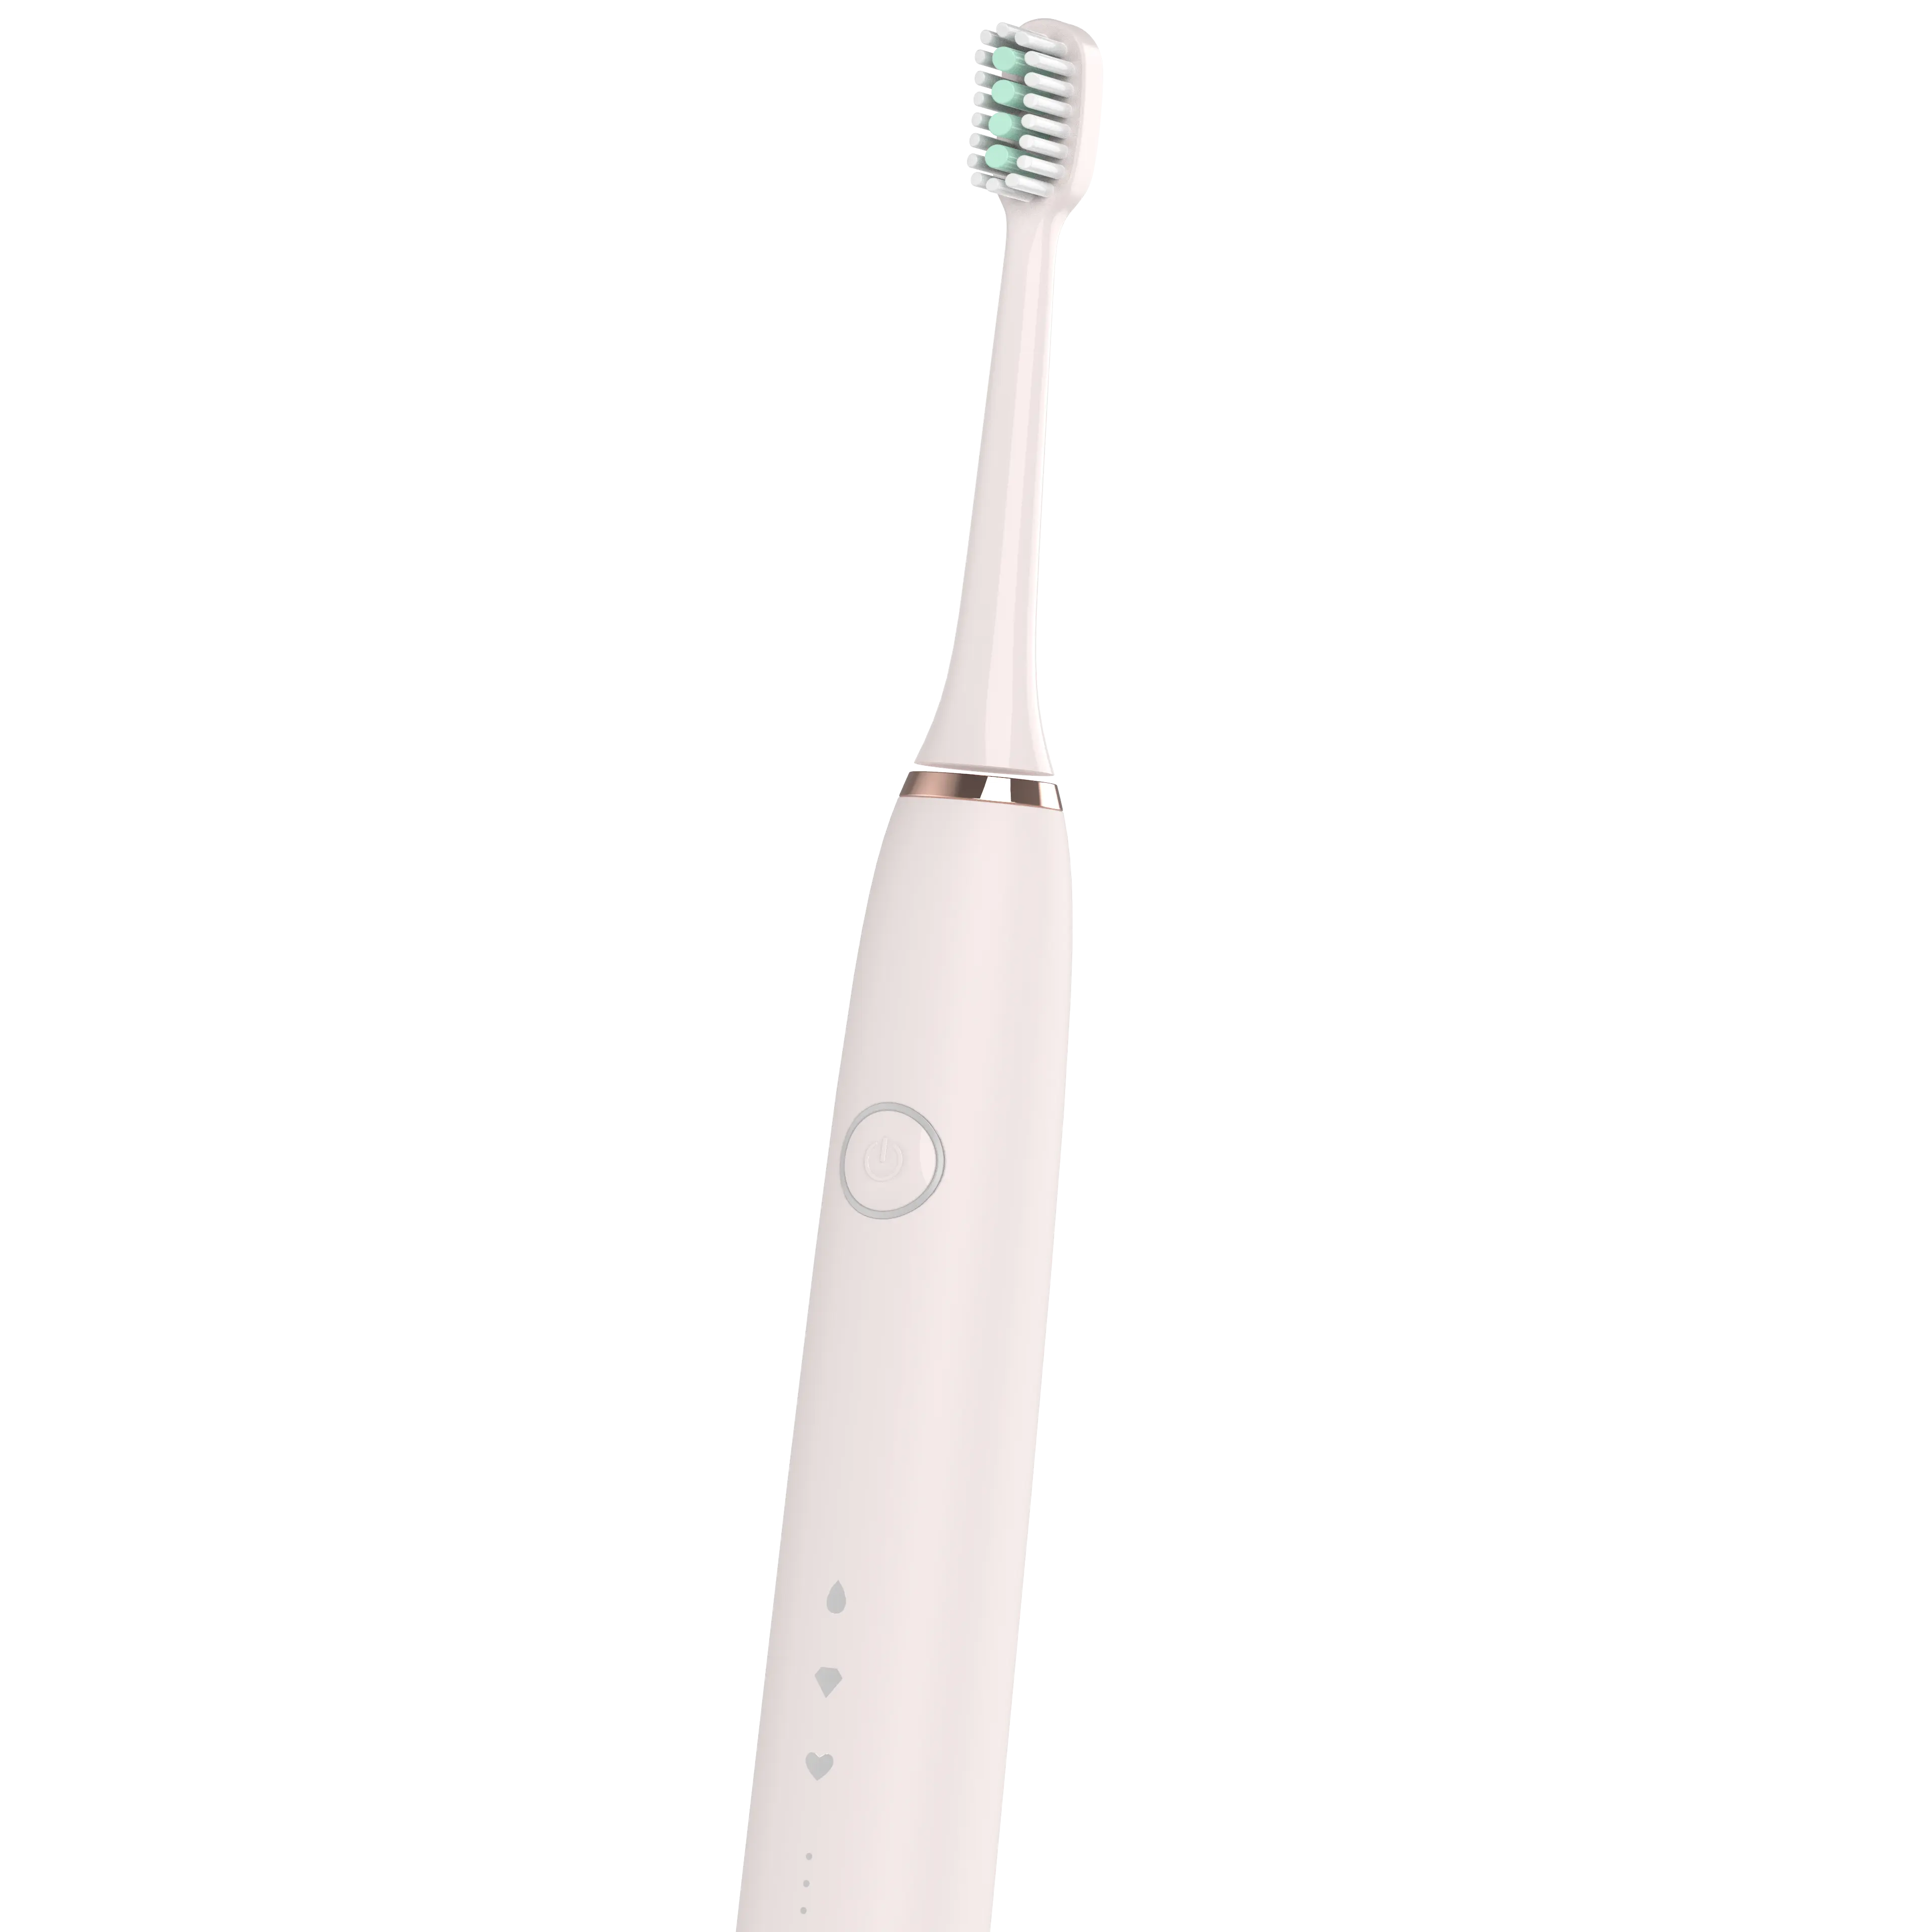 IPX5-7 Adult Timer Oral Cleaning Whitening Teeth Brush Soft Bristle Sonic Electric Toothbrush Head Replacement